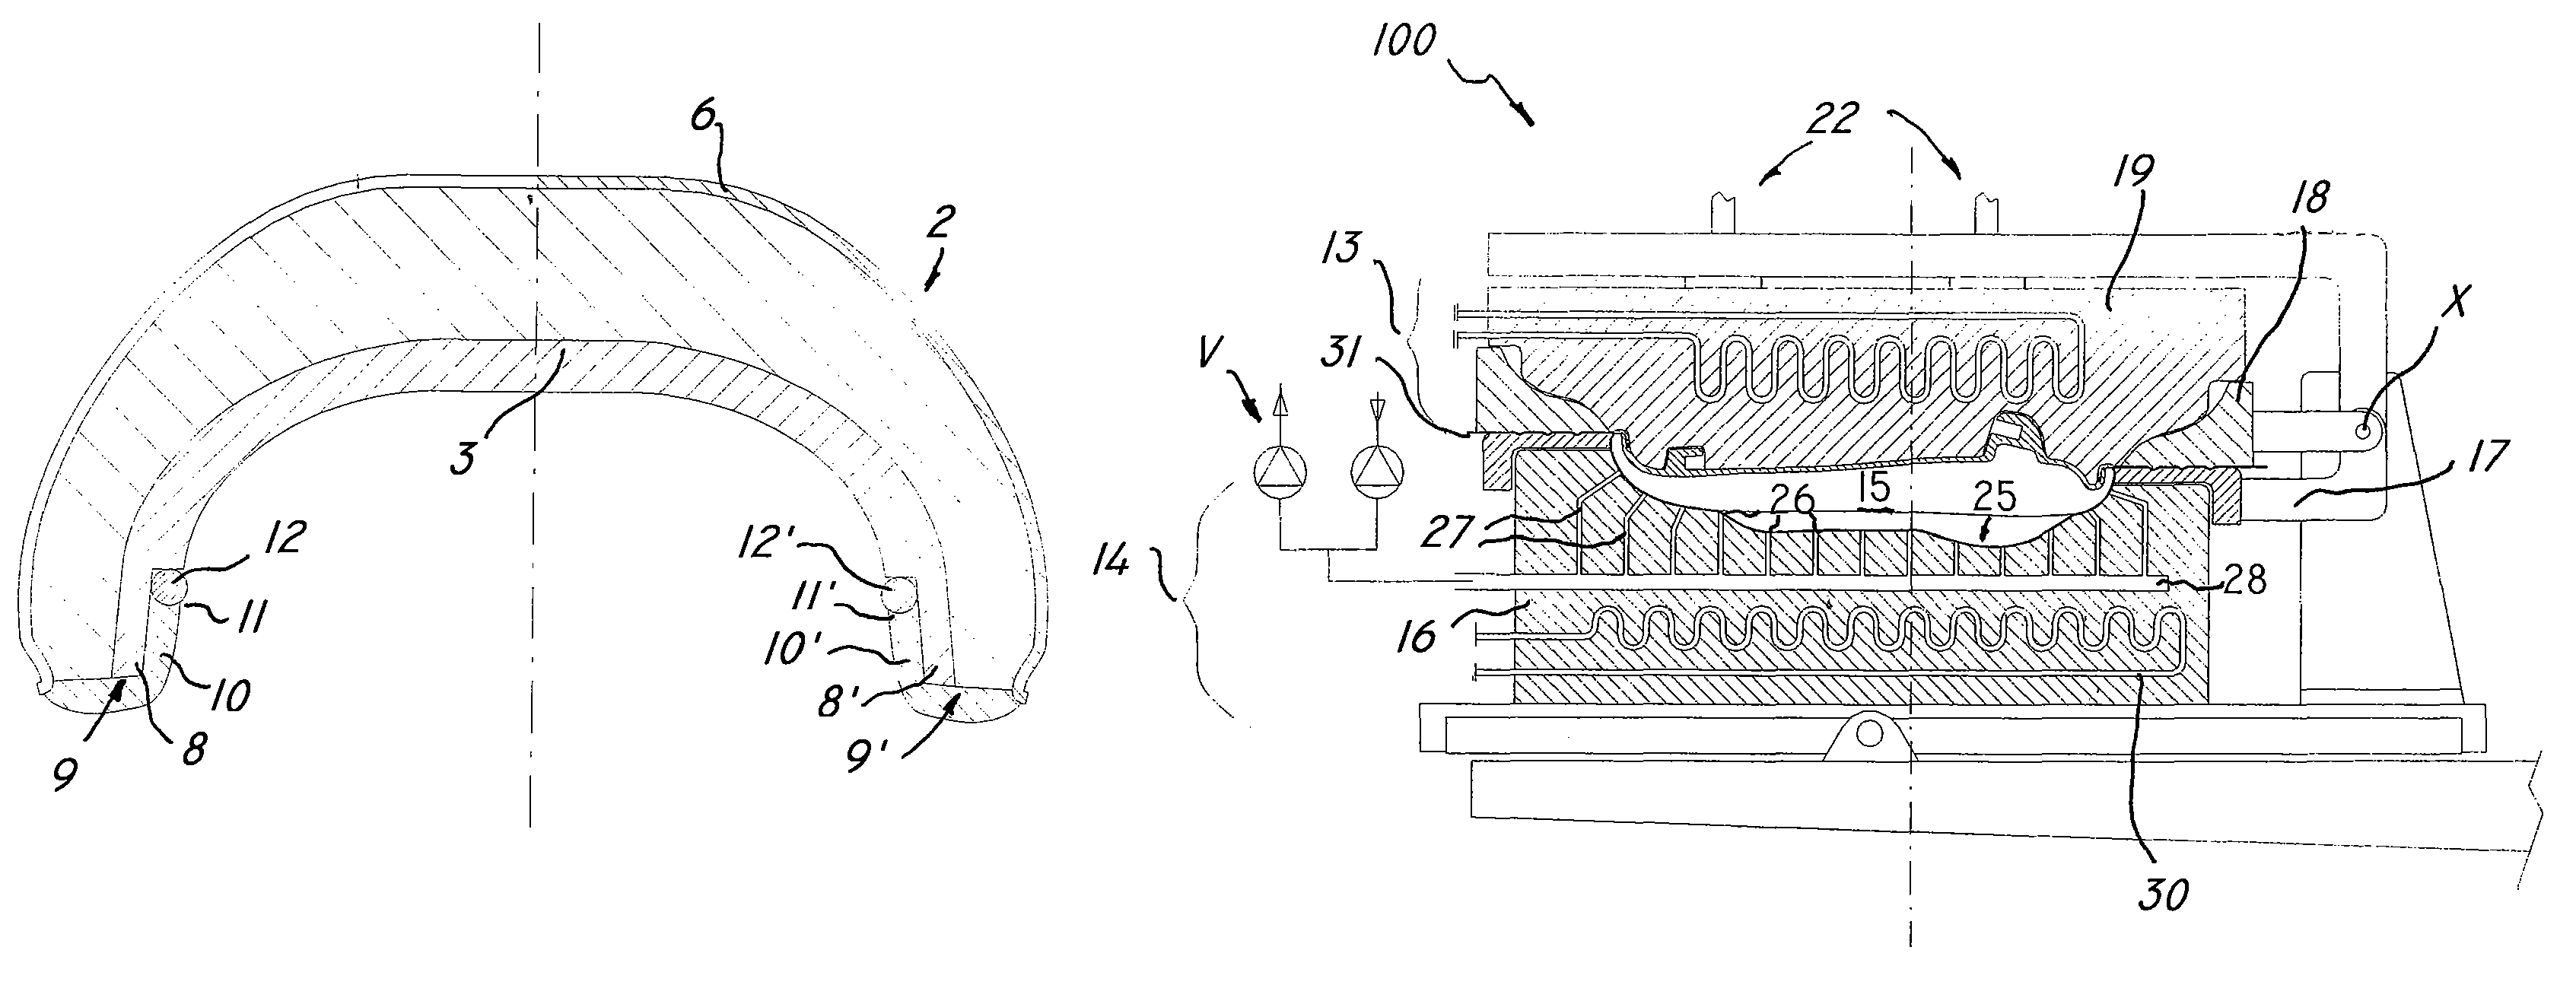 Methods of manufacturing integral elastic supports